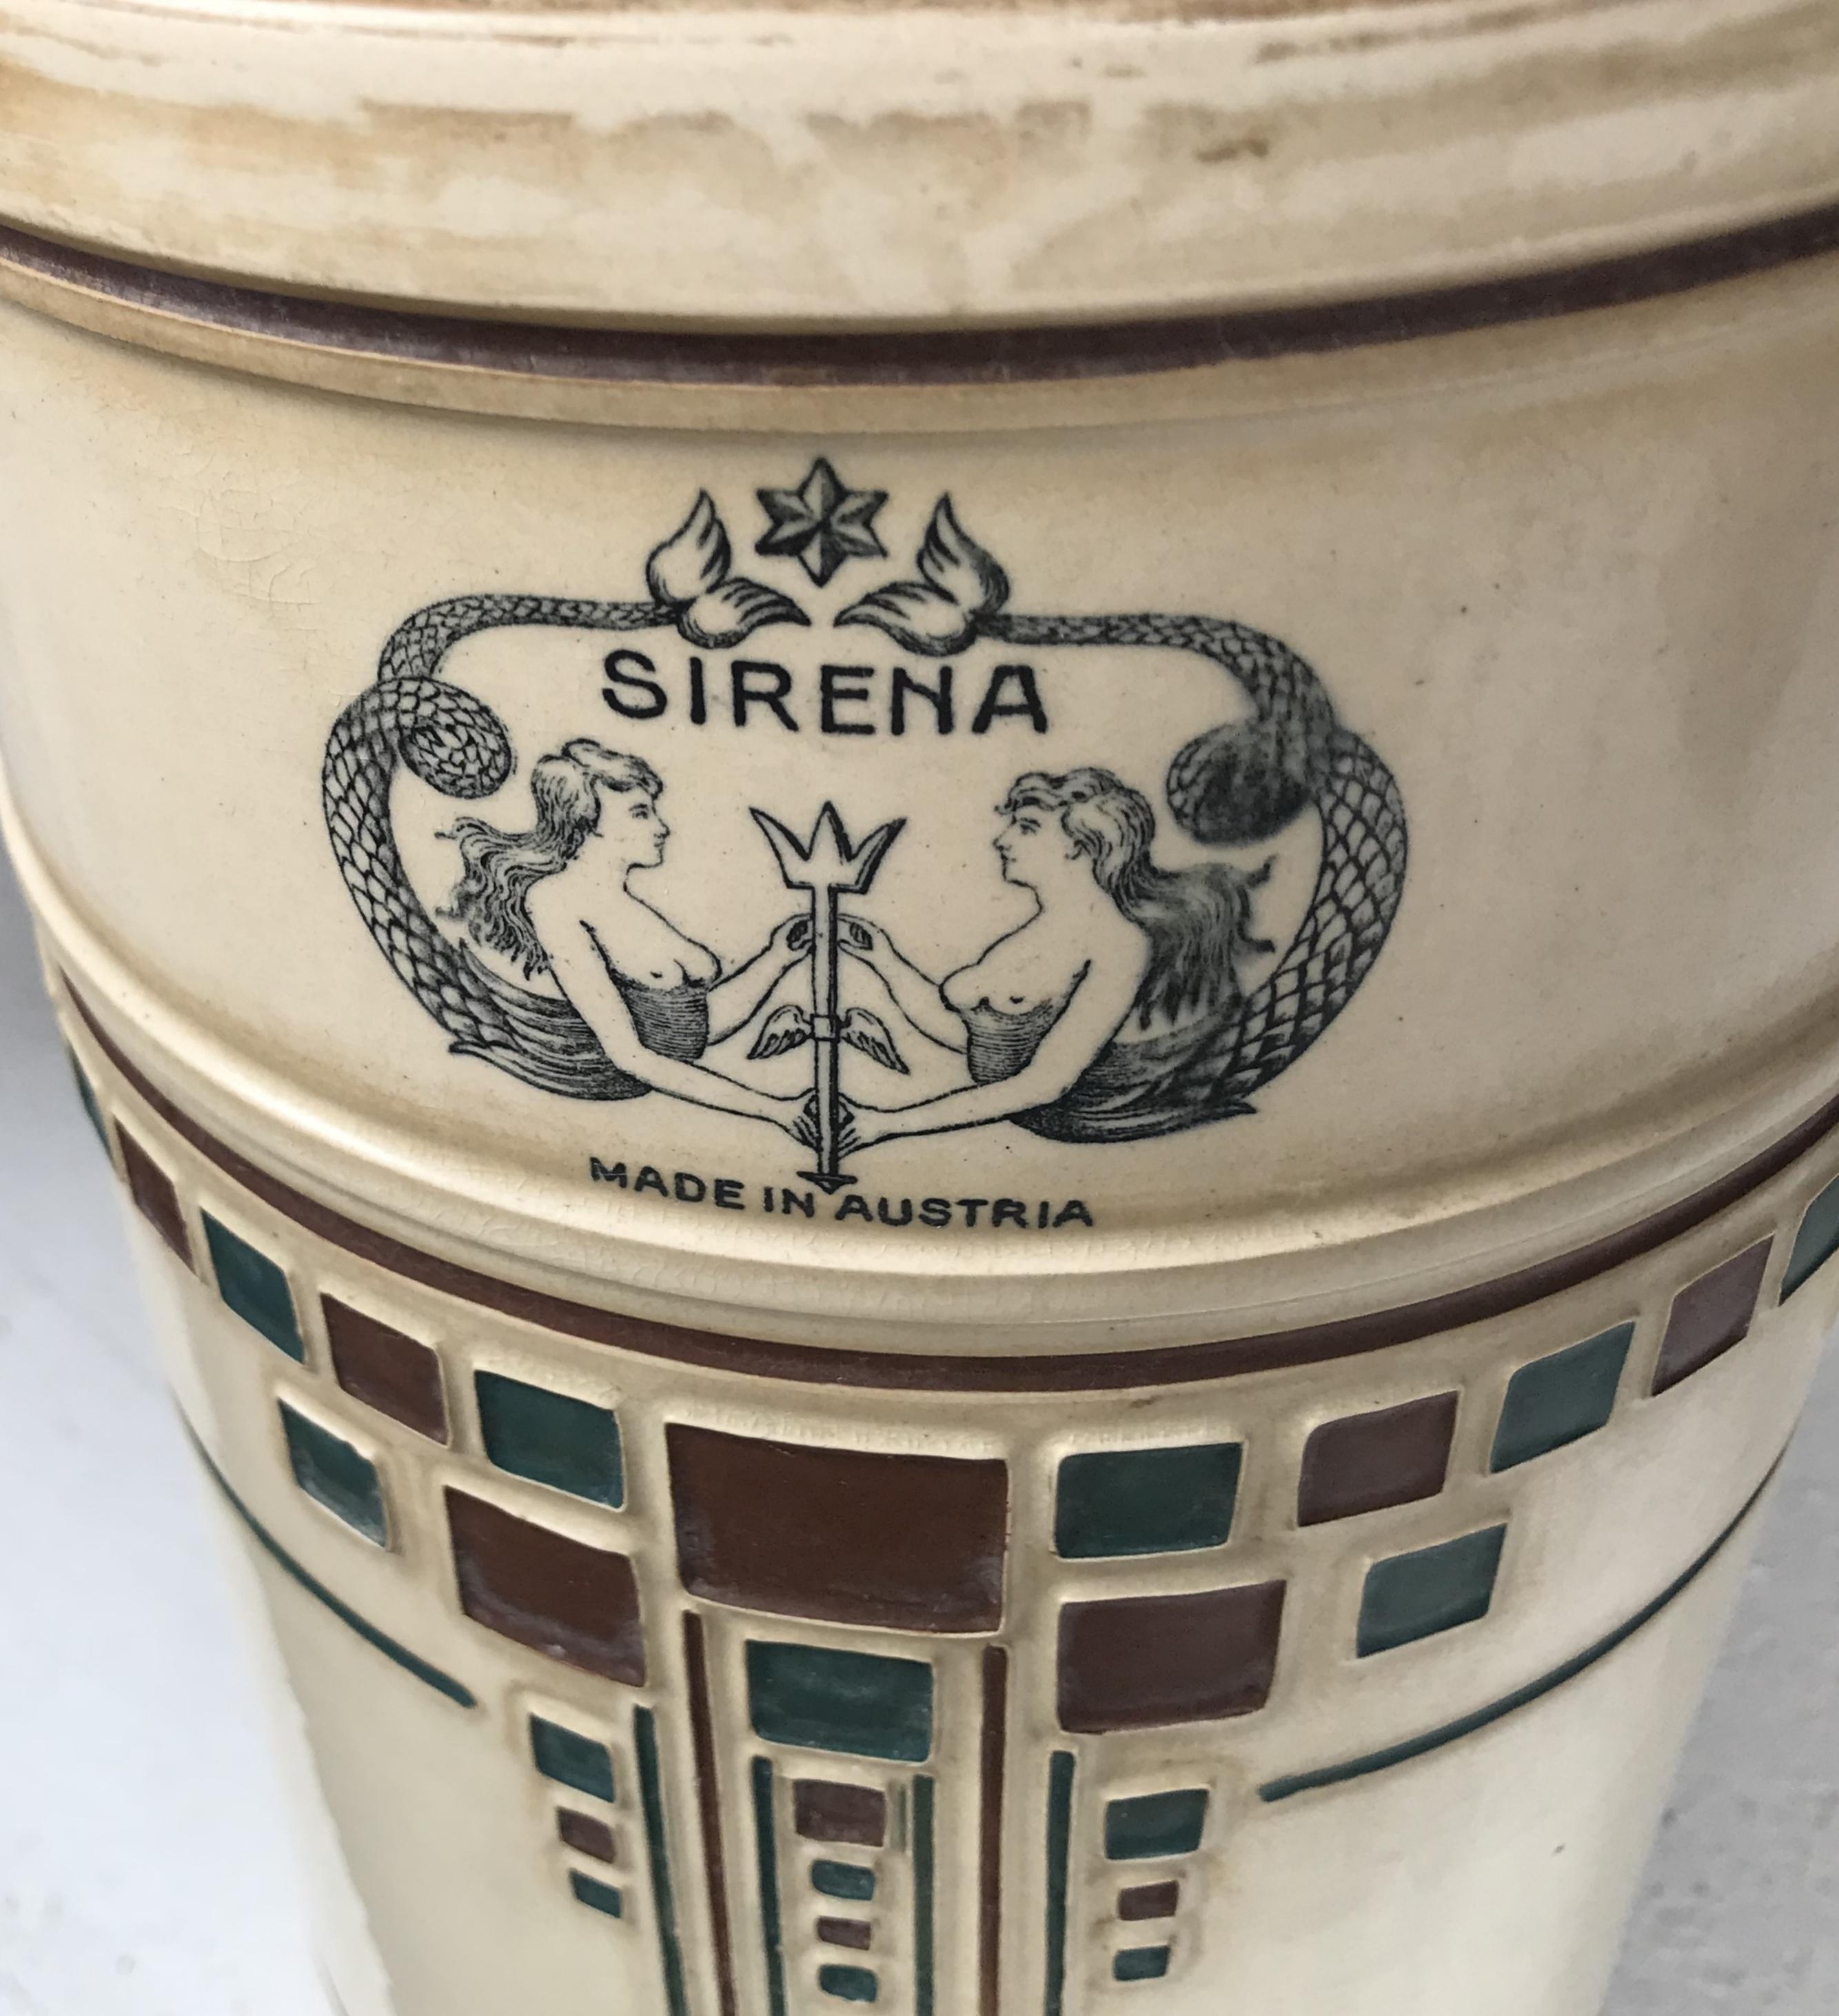 Filter Sirena 'Made in Austria', 1900 For Sale 8